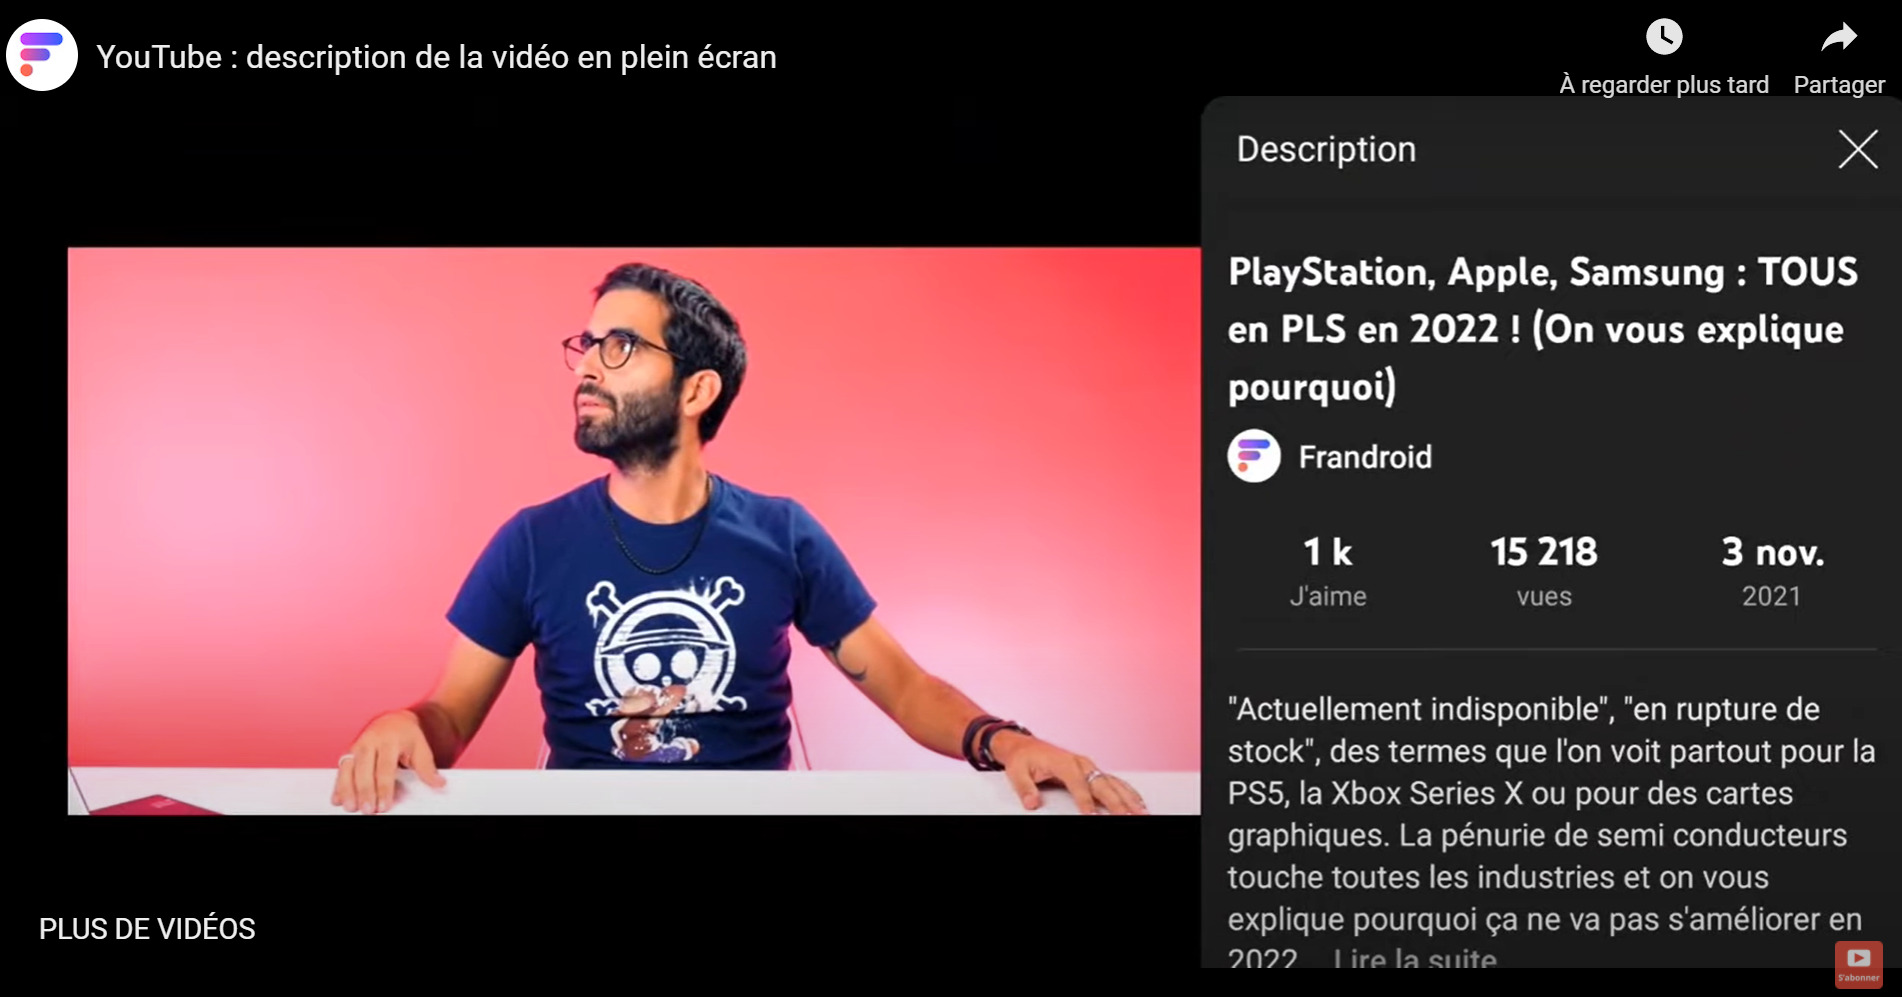 telecharger youtube sur android iphone ipad et apk